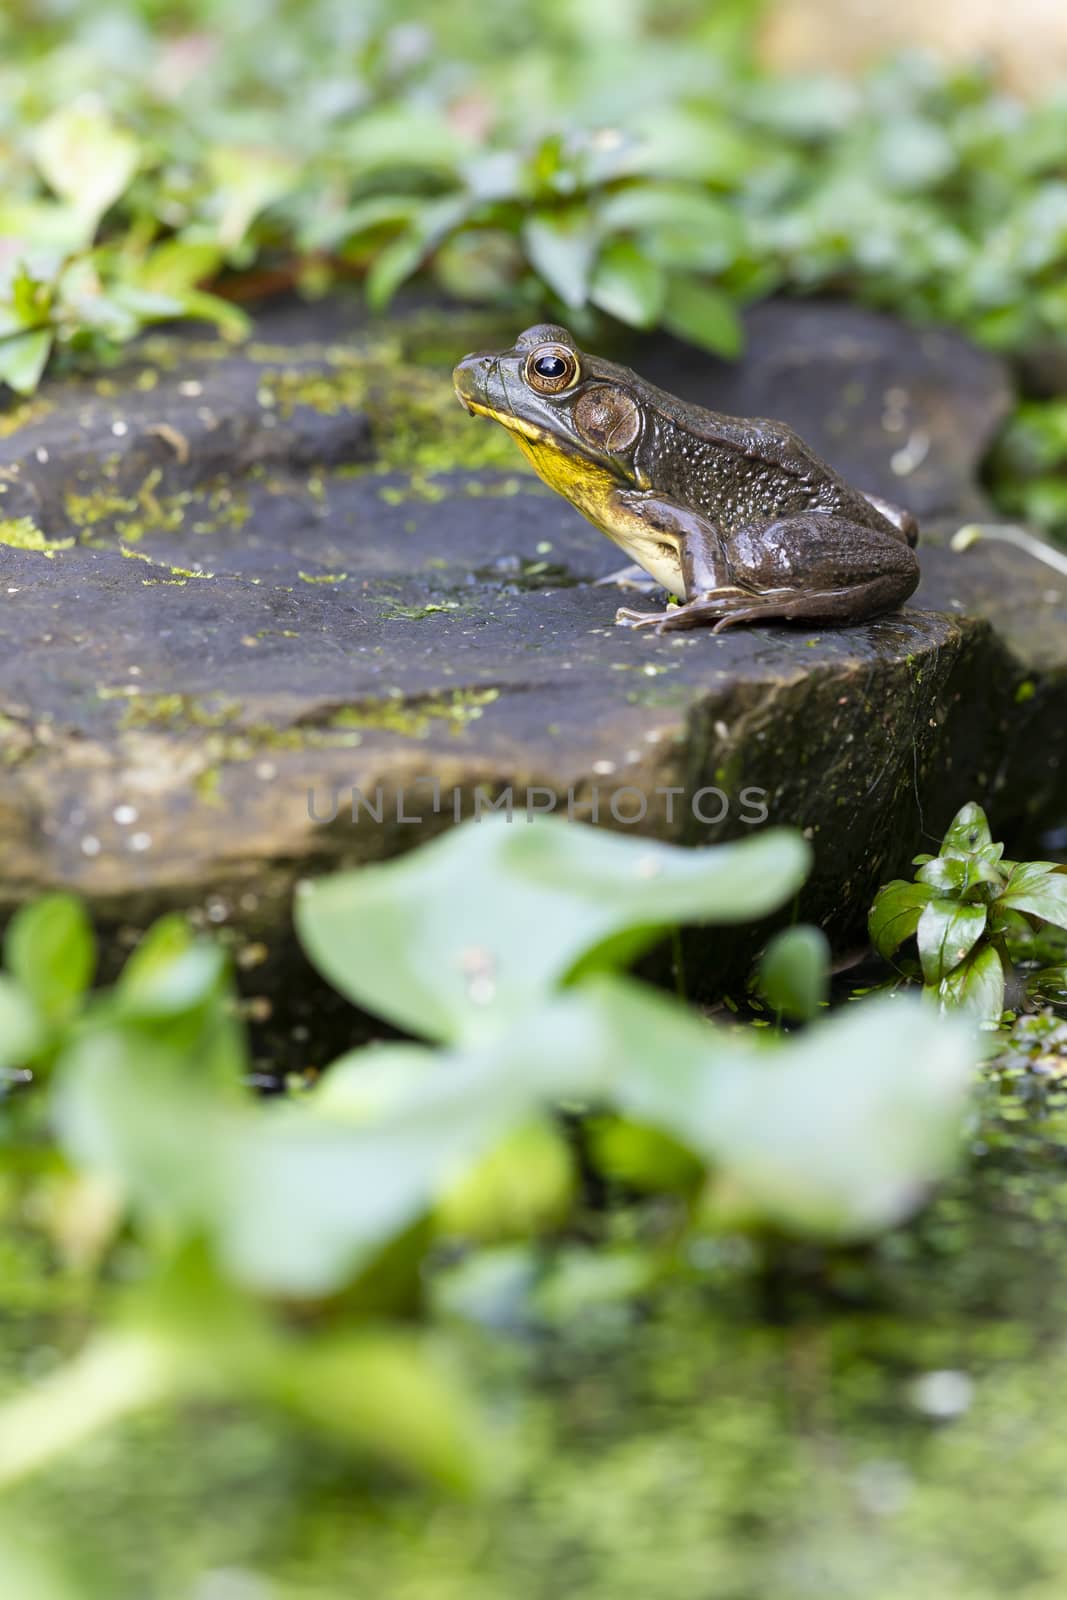 A Frog sitting on a rock in a garden pond surrounded by green leaves by WittkePhotos